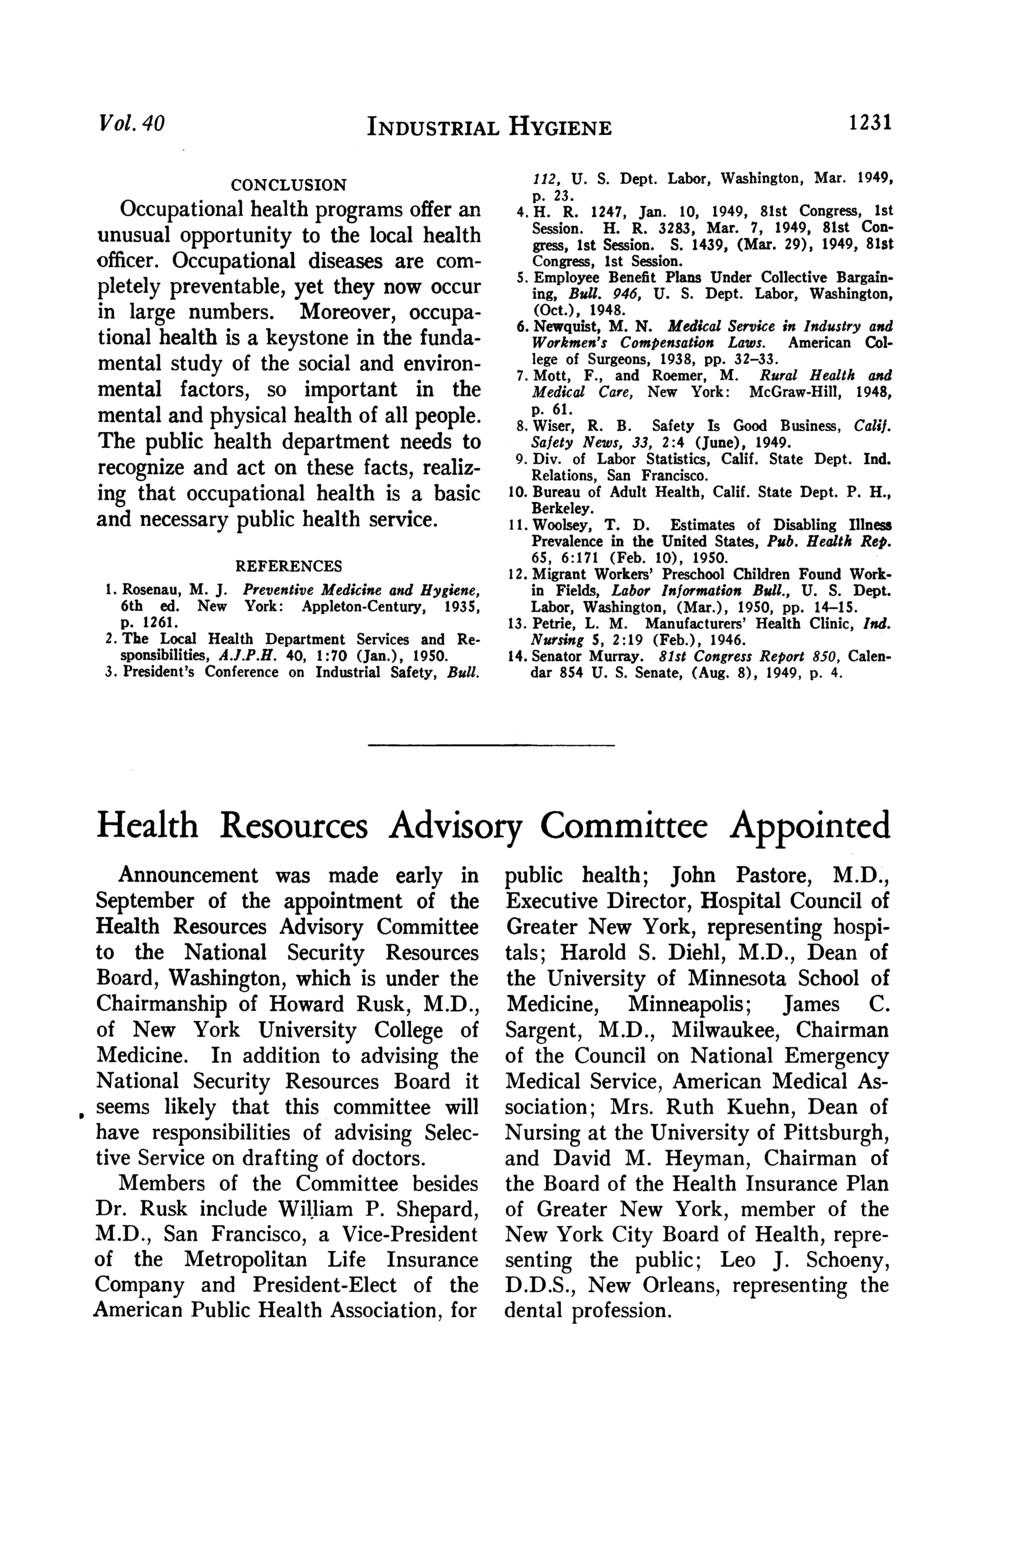 Vol. 40 INDUSTRIAL HYGIENE 1231 CONCLUSION Occupational health programs offer an unusual opportunity to the local health officer.